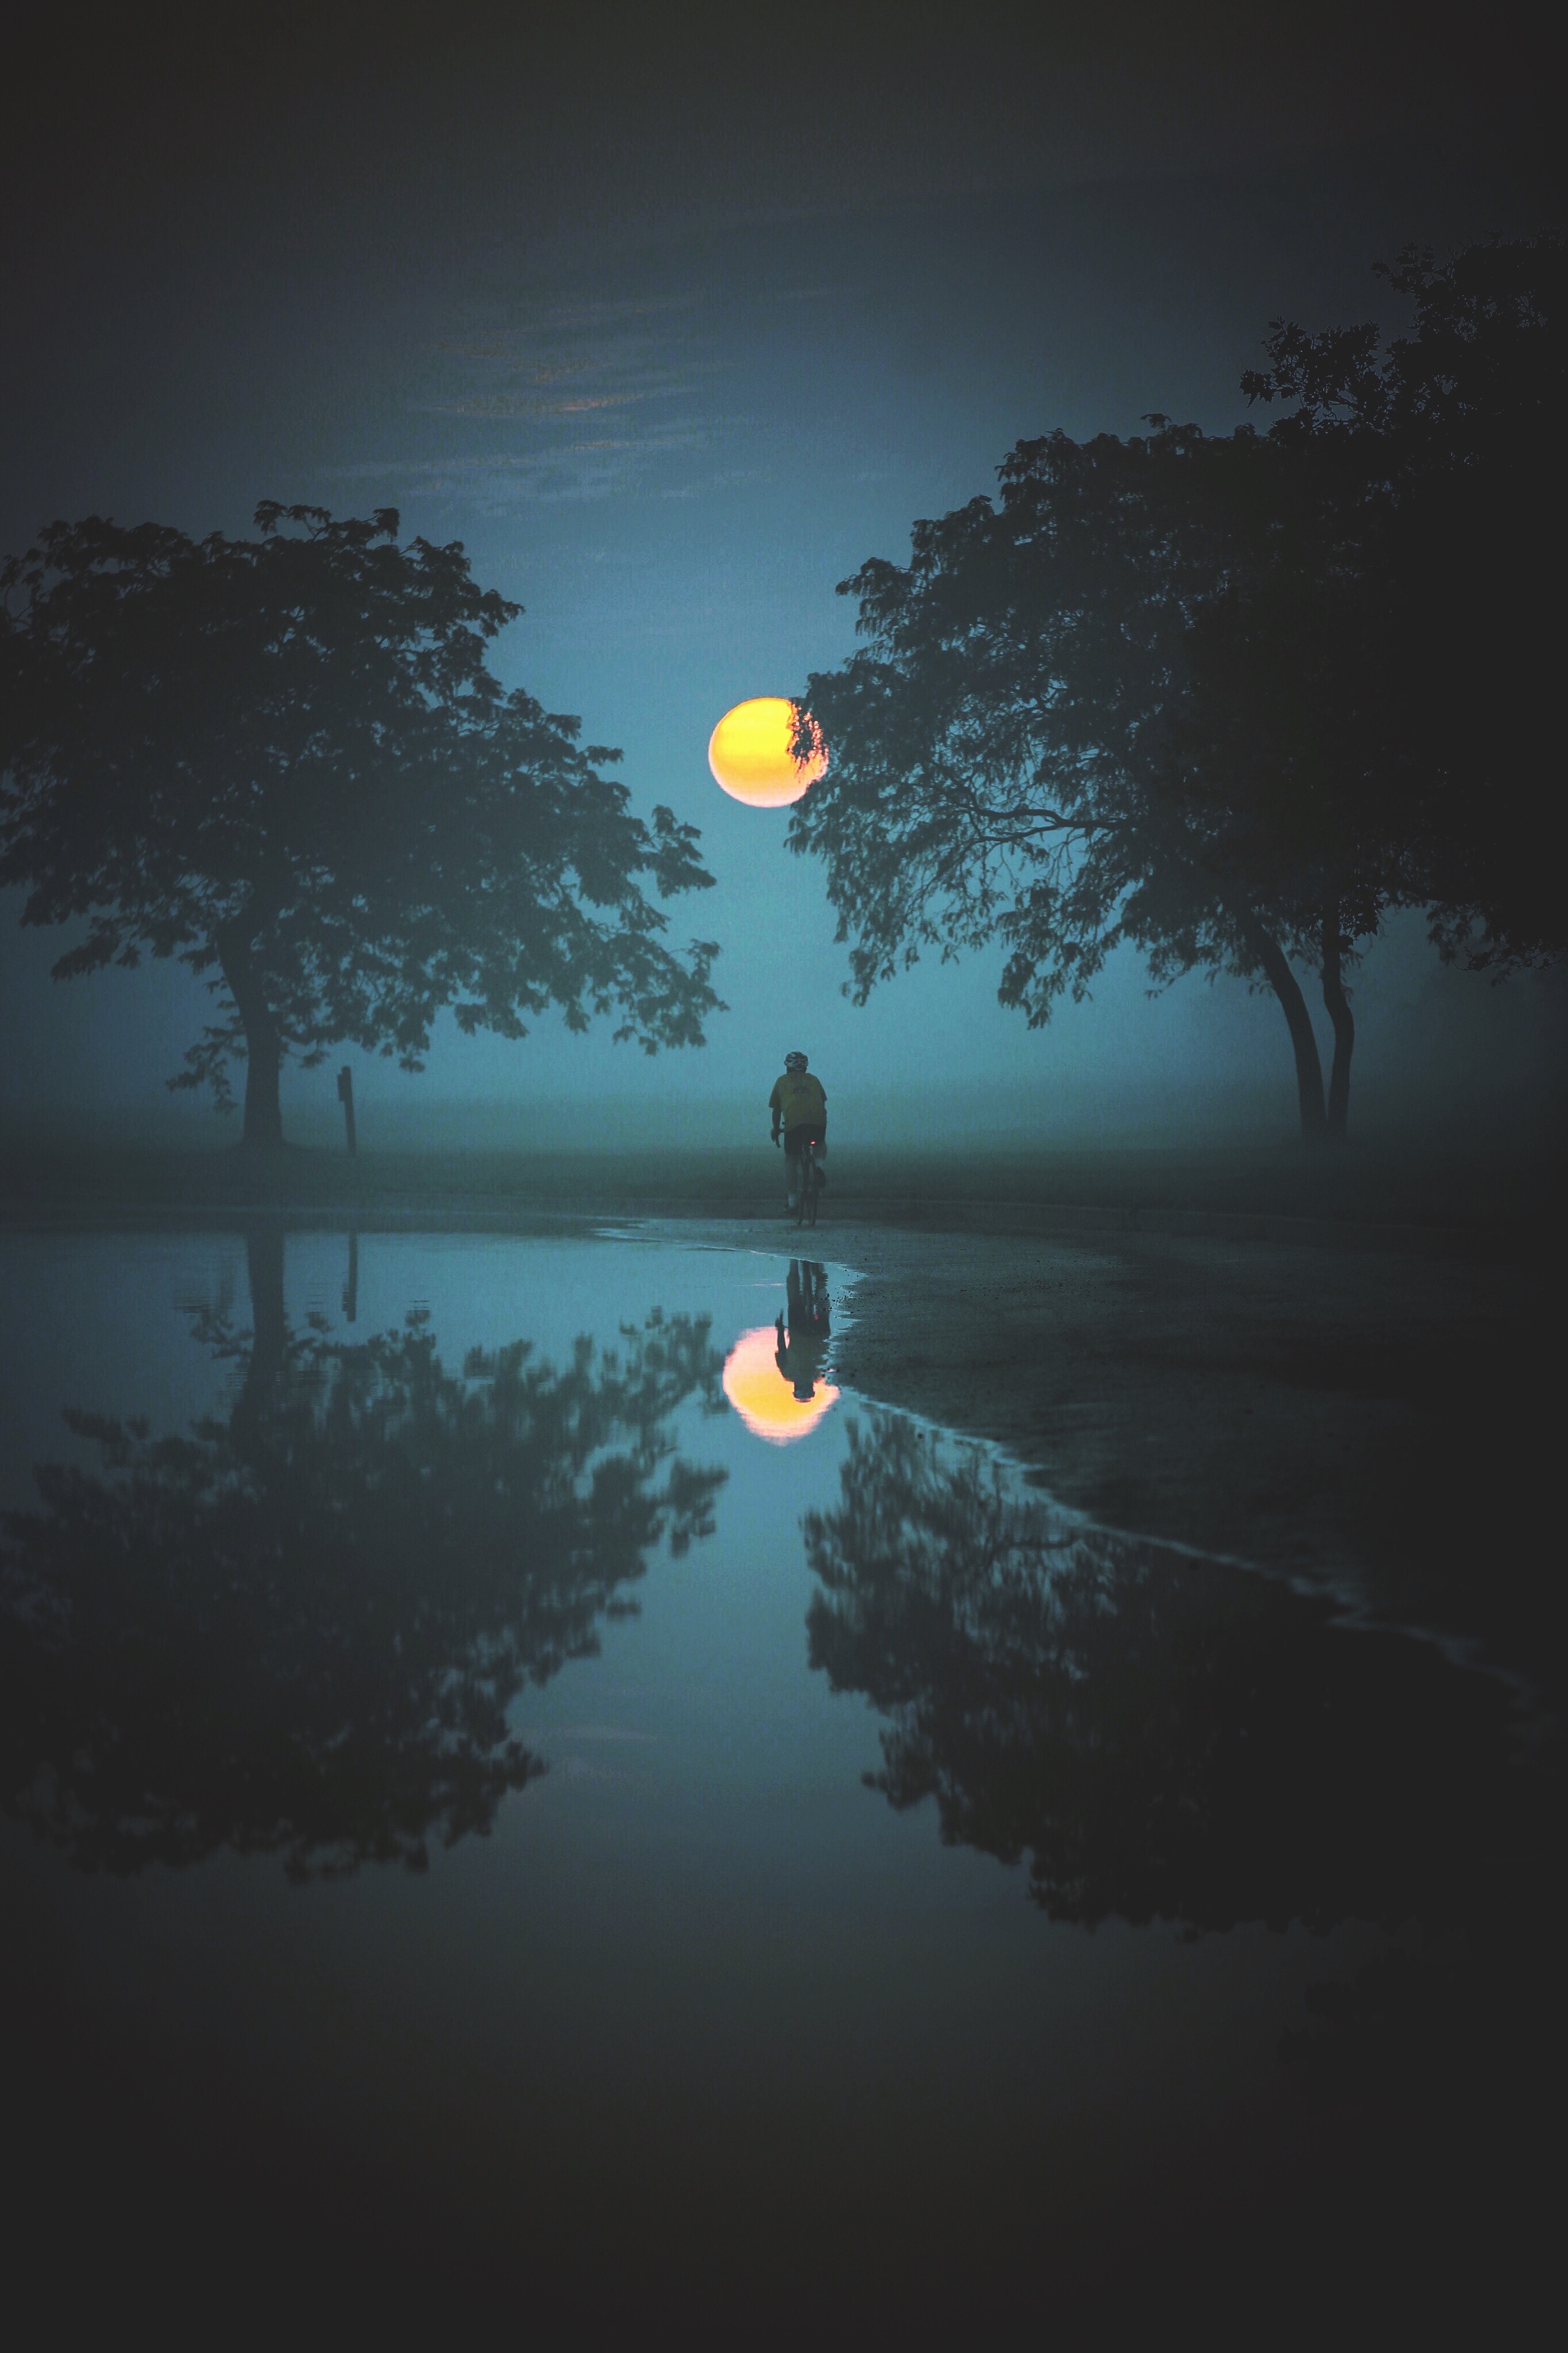 reflection, moon, cyclist, nature, water, trees, fog